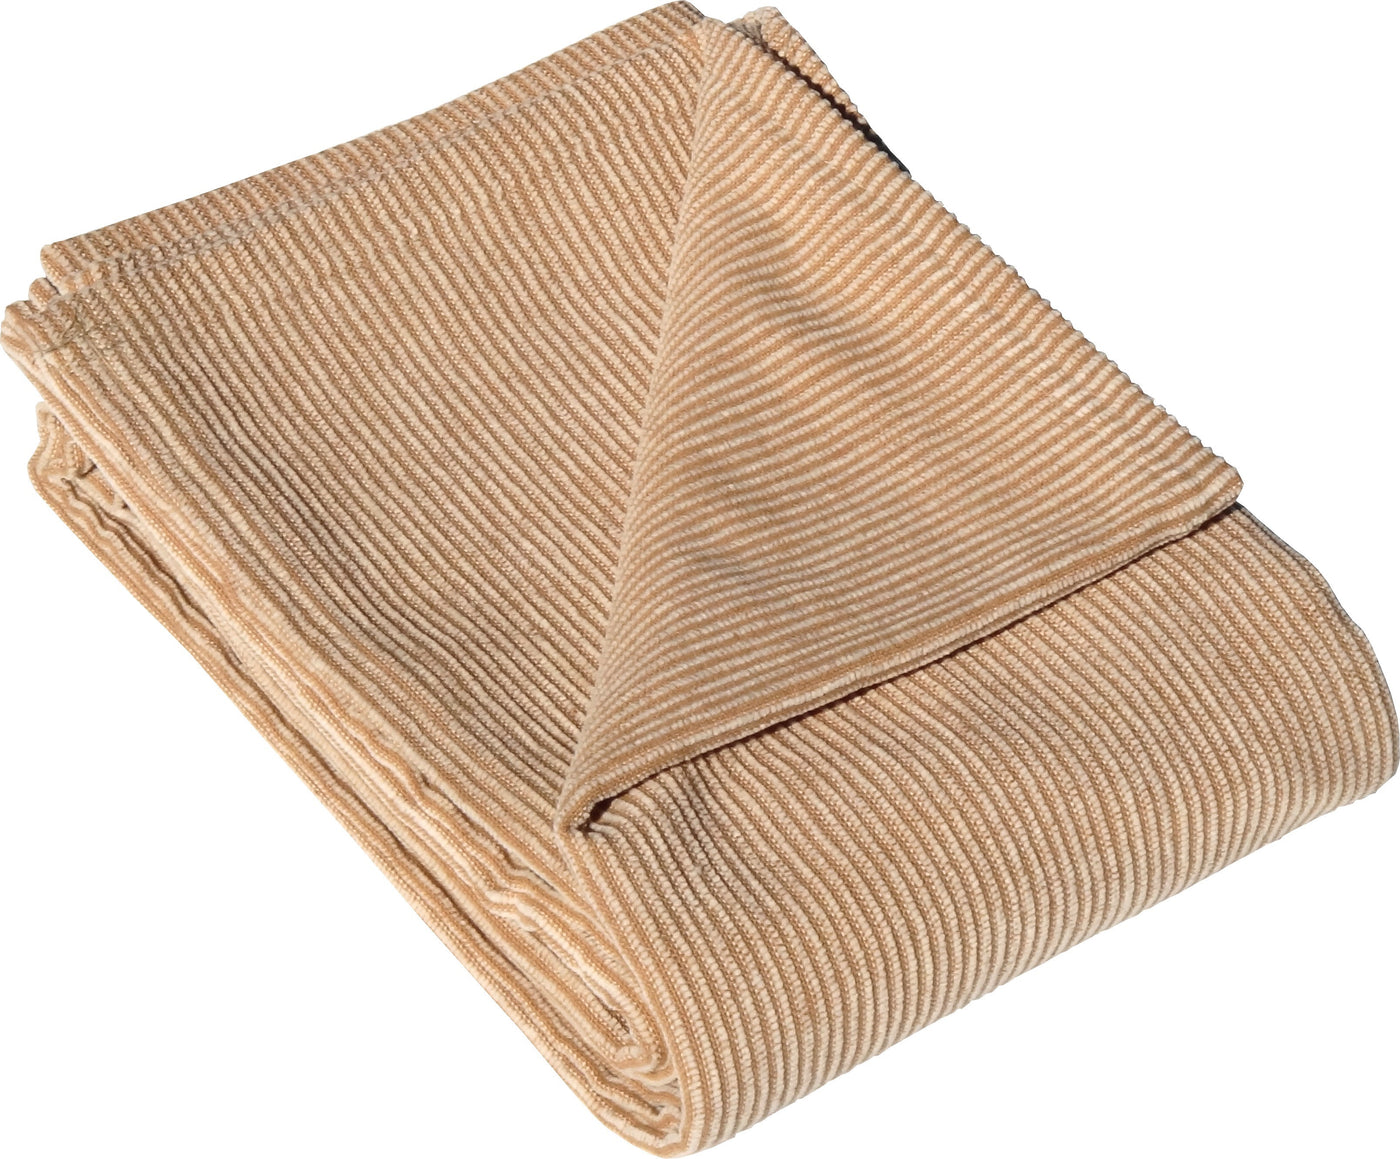 Striped Brown/Natural Chenille 40 x 56" Toddler Blanket